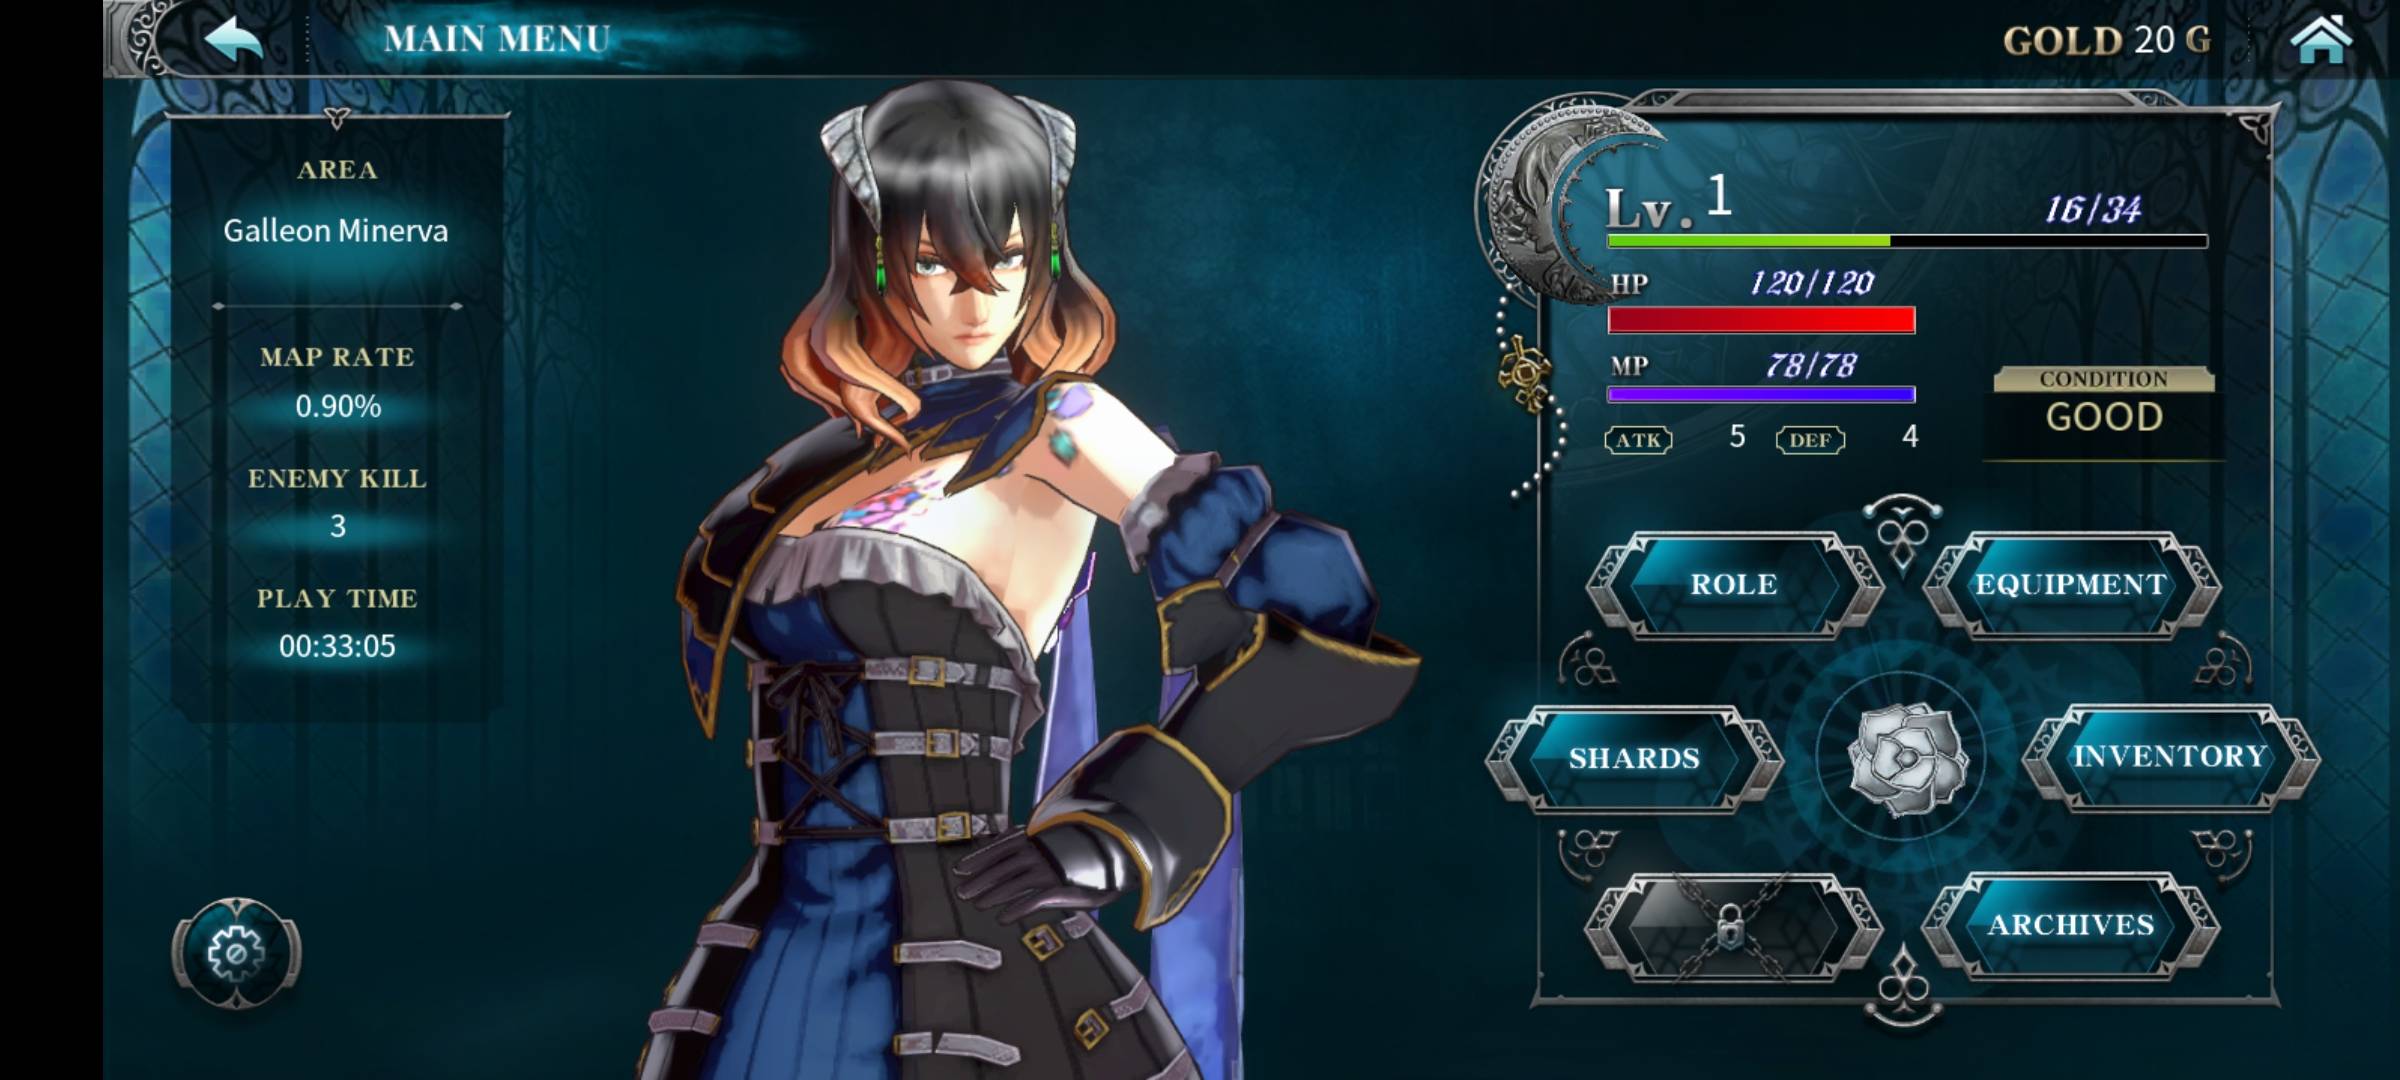 Bloodstained Ritual Of The Night Lands On Android For 10 But It S A Sloppy Port